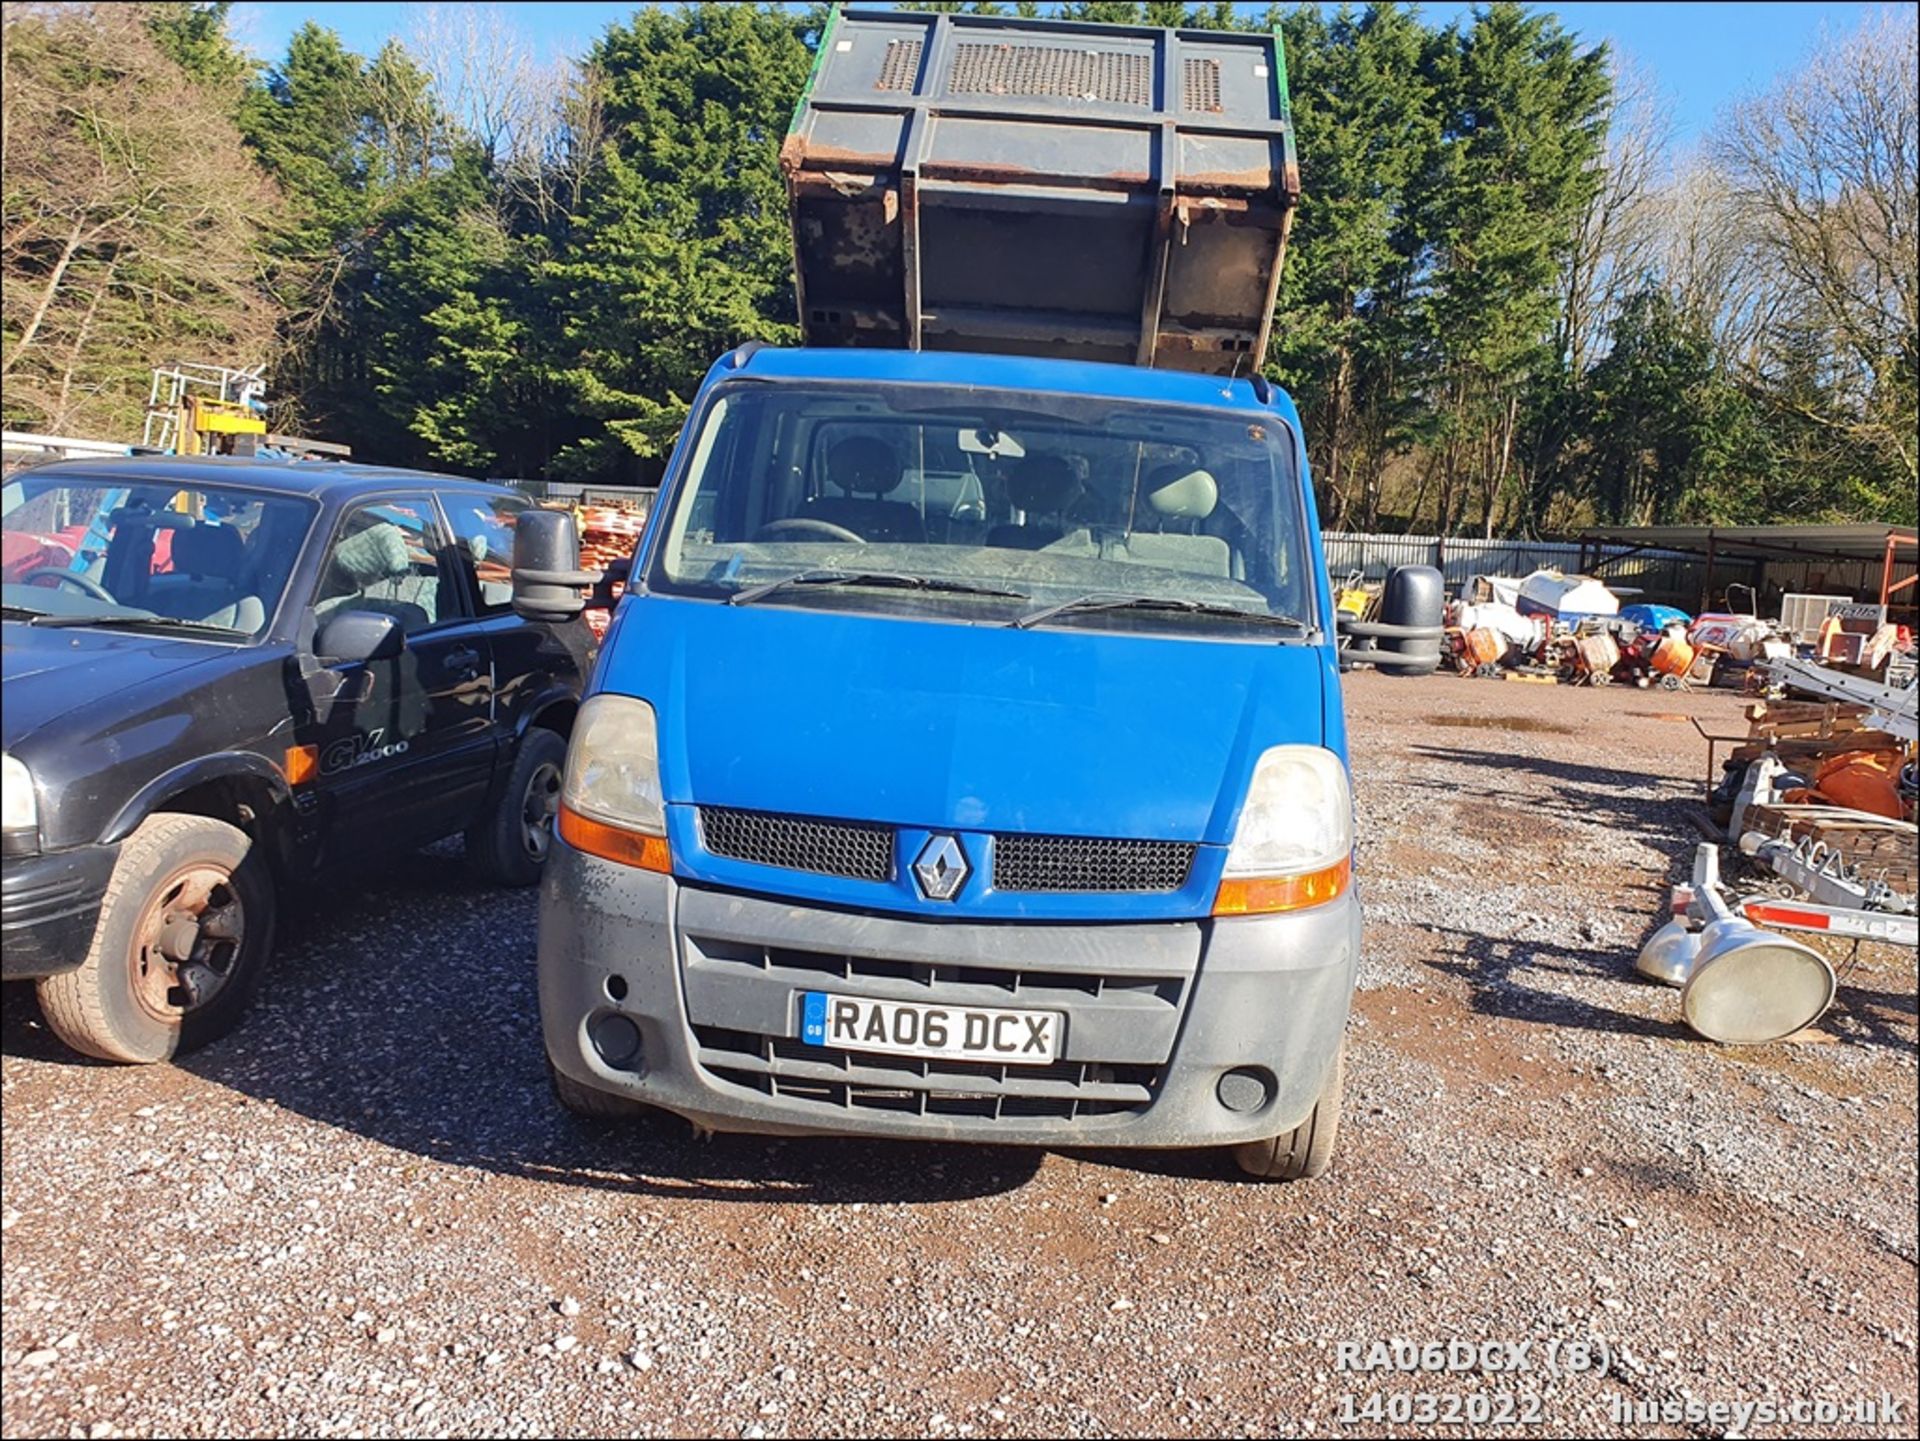 06/06 RENAULT MASTER CCML35 DCI 120 MWB - 2463cc 2dr Tipper (Grey) - Image 8 of 22